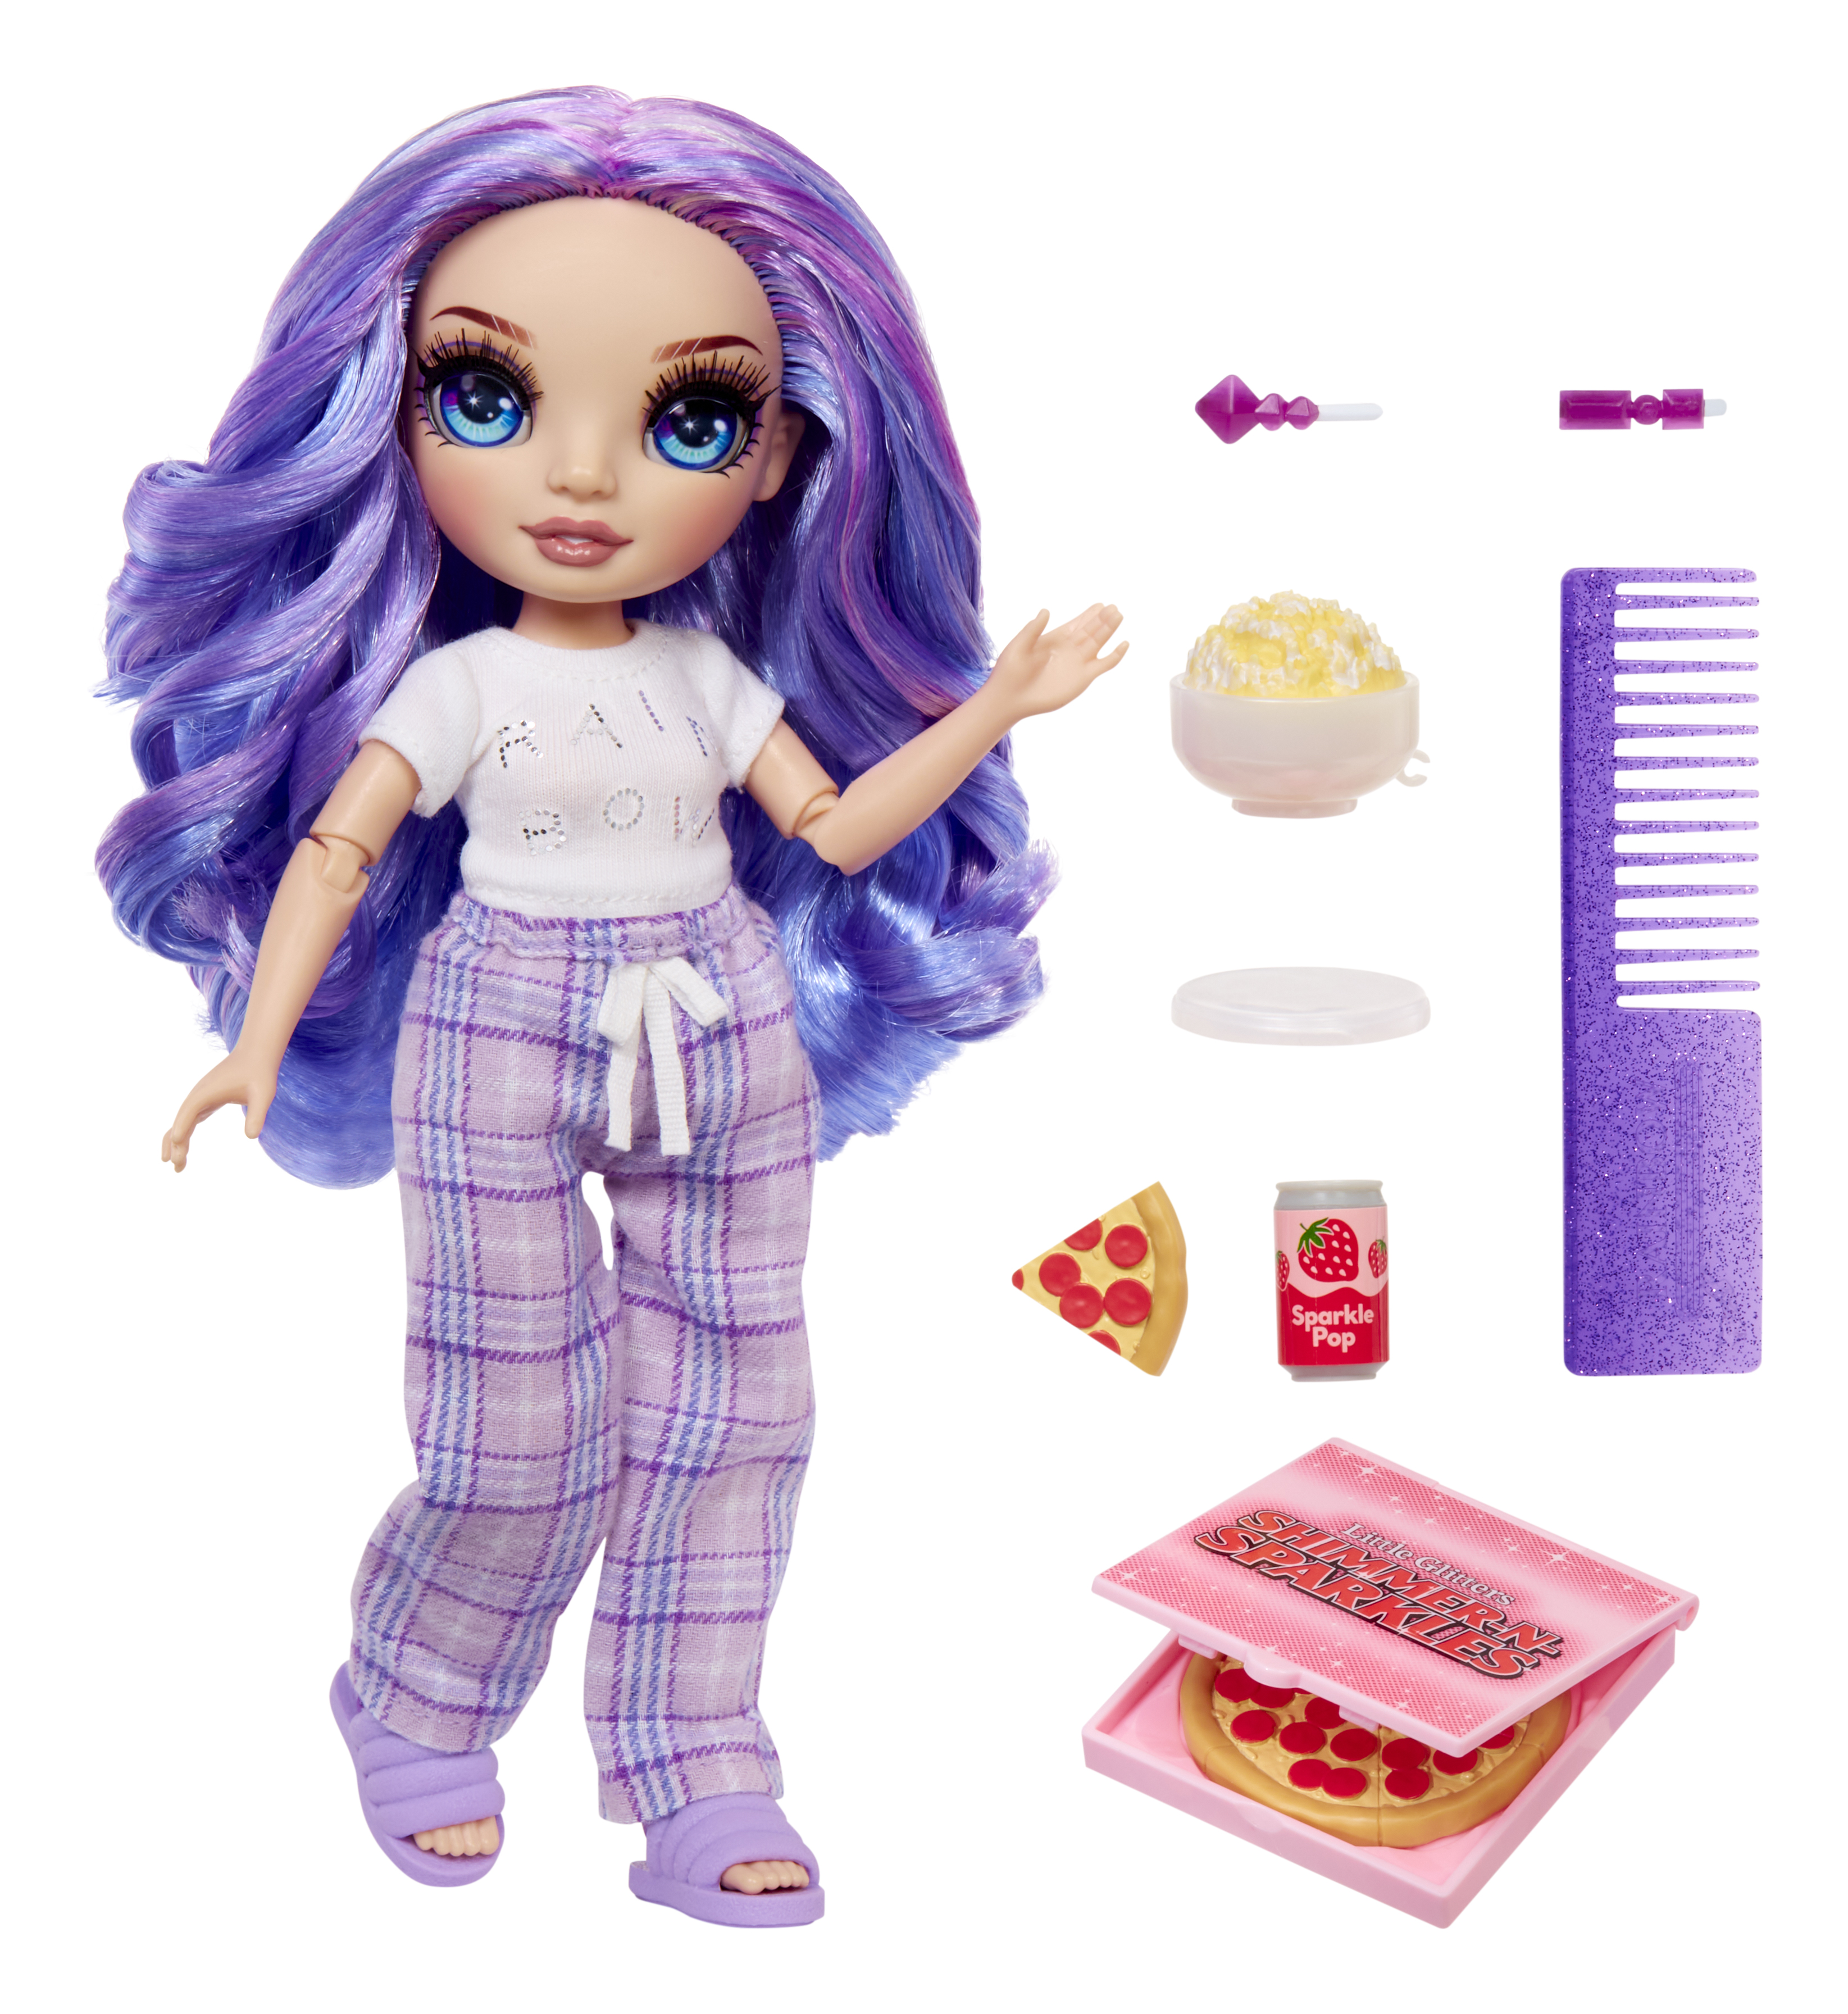 Rainbow High Jr High PJ Party Violet, Purple 9” Posable Doll, Soft Onesie, Slippers, Play Accessories, Kids Toy Ages 4-12 - image 3 of 8